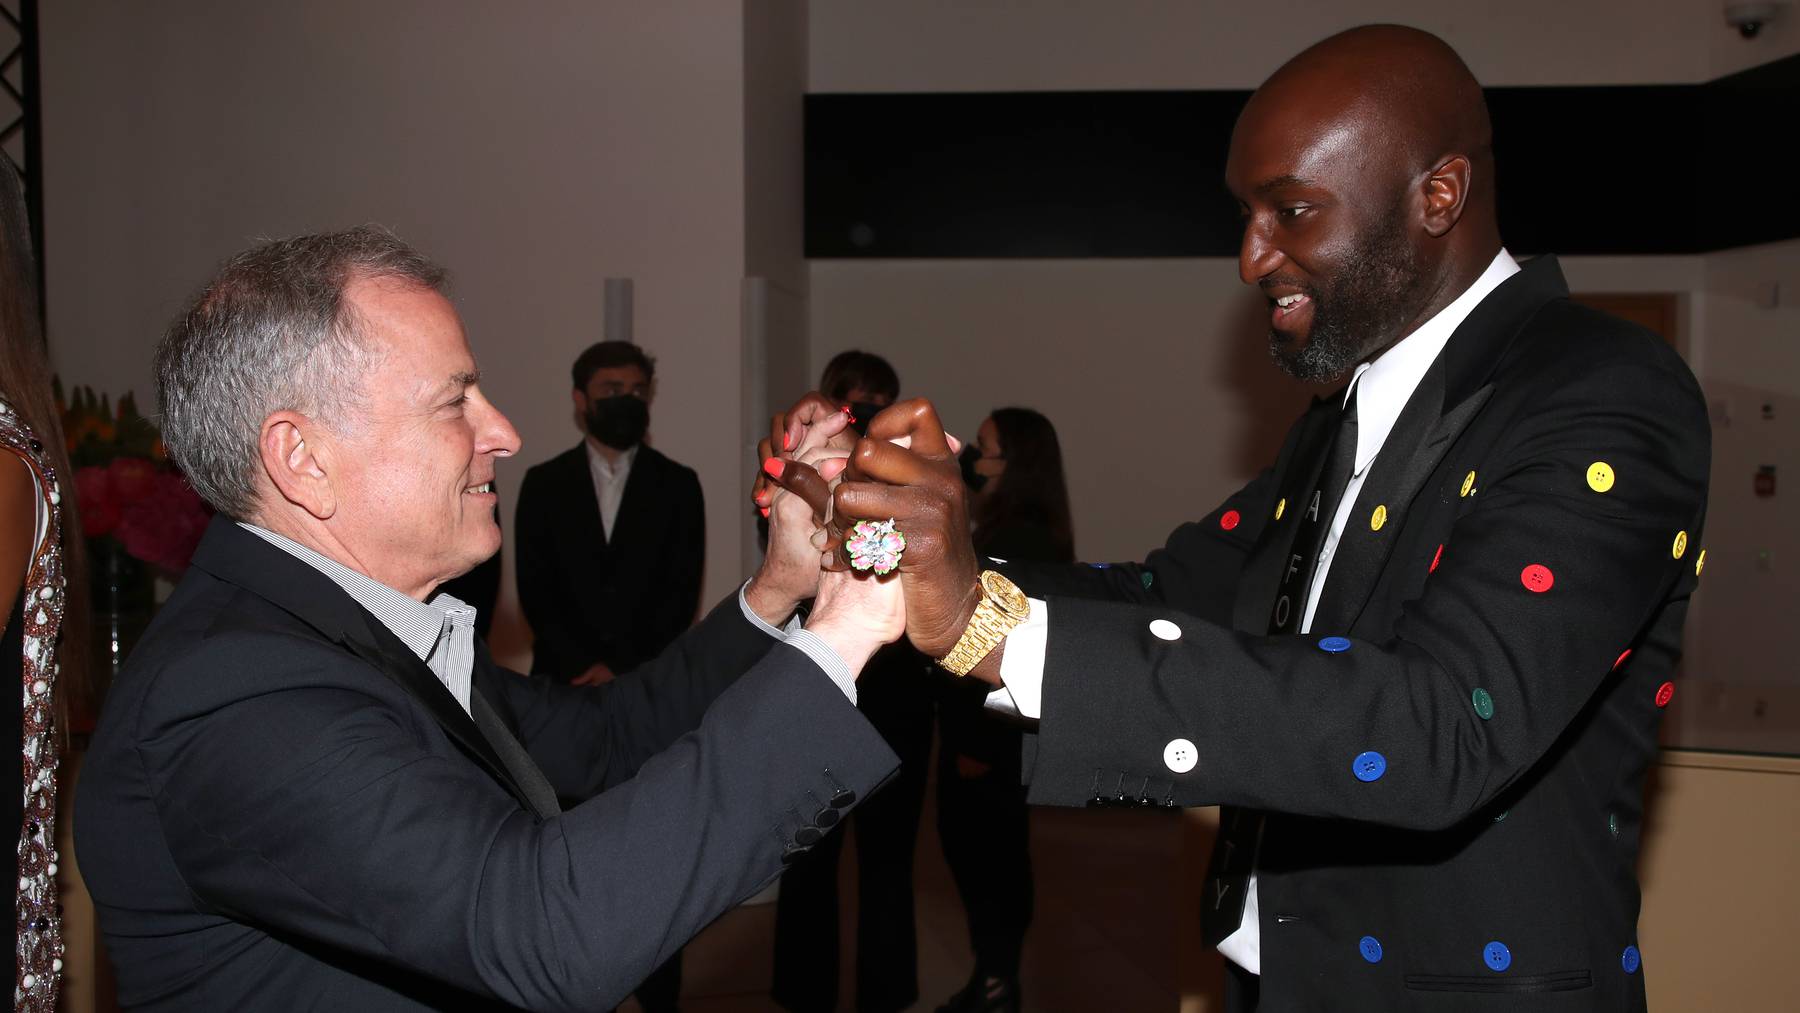 Michael Burke and Virgil Abloh host dinner at Fondation Louis Vuitton in July 2021 in Paris. Getty Images.